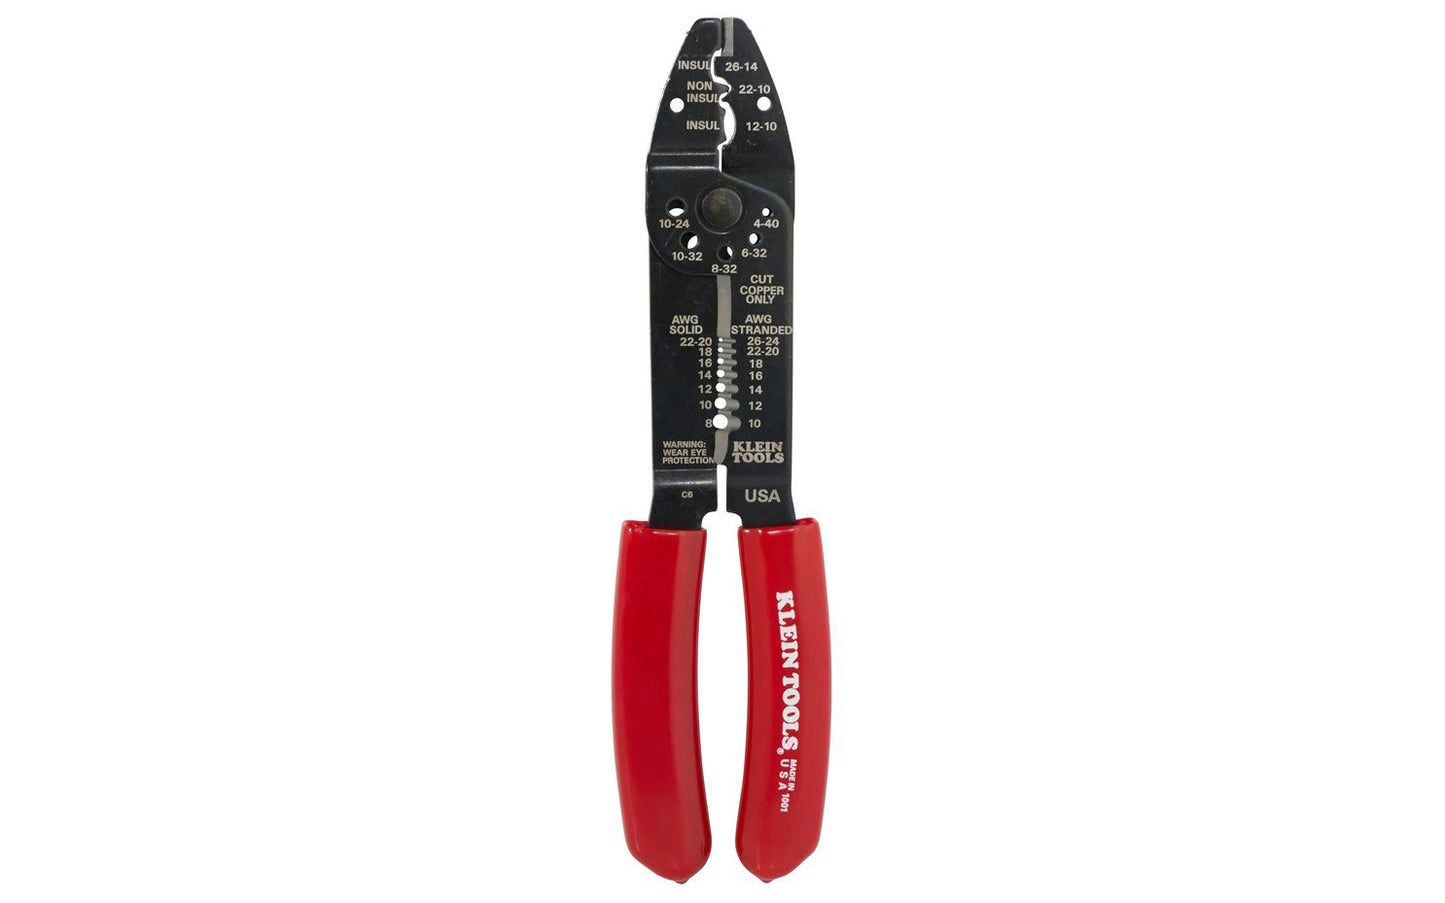 The Klein Tools Wire Stripper Multi-Tool cuts, crimps, and strips solid and stranded wire and shears bolts. Two cutting blades for 8-22 AWG solid and 10-26 AWG stranded wire. The crimping function handles 7-8 mm insulated and non-insulated terminals, lugs, and splices.  Made in USA.